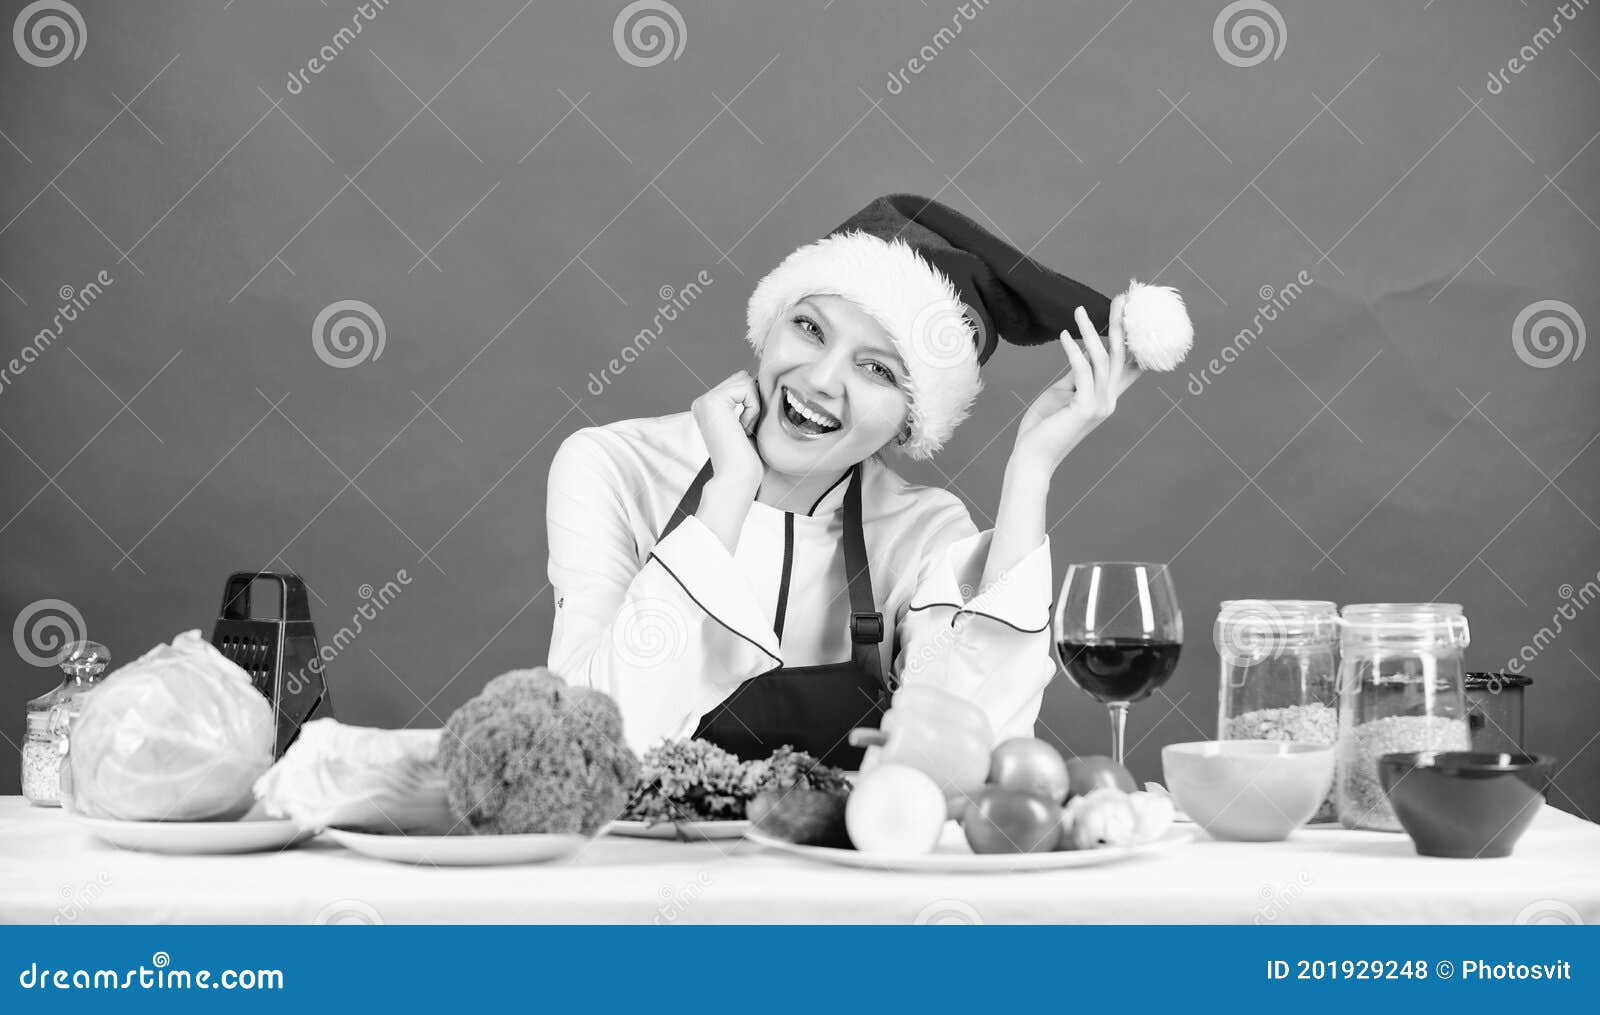 Best Christmas Recipes of Perfect Housewife. Woman Chef Santa Hat ...